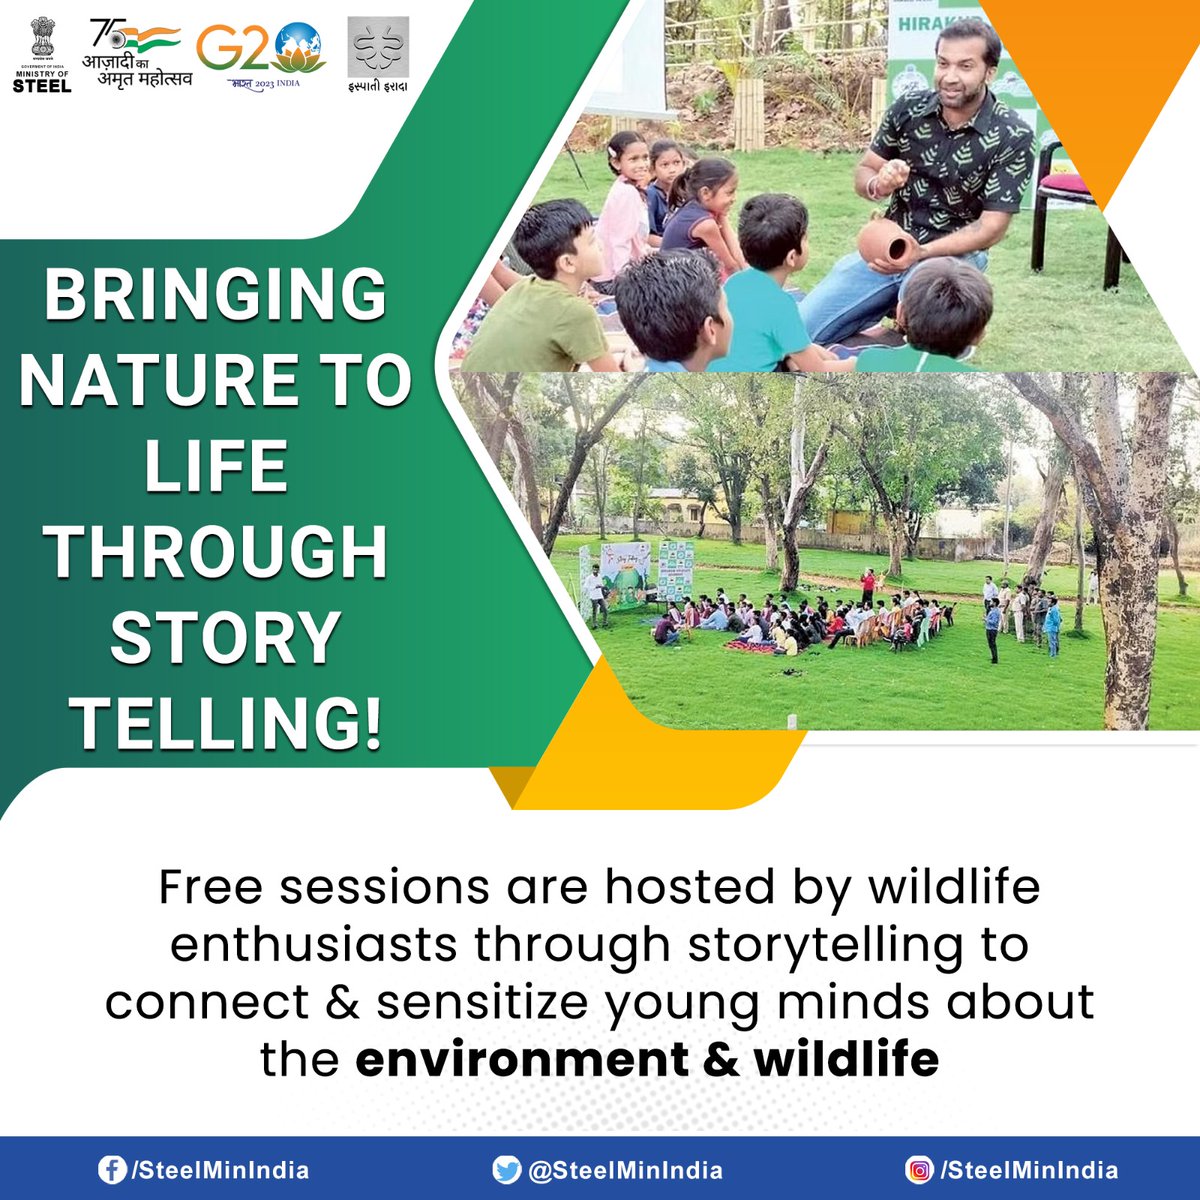 Hats Off to the Hirakud Wildlife Division, for conducting weekly nature education programs to educate young minds about the beauty & importance of our environment.🌿🐾 #PositiveNews #ConnectingWithNature #WildlifeEducation #StorytellingForConservation